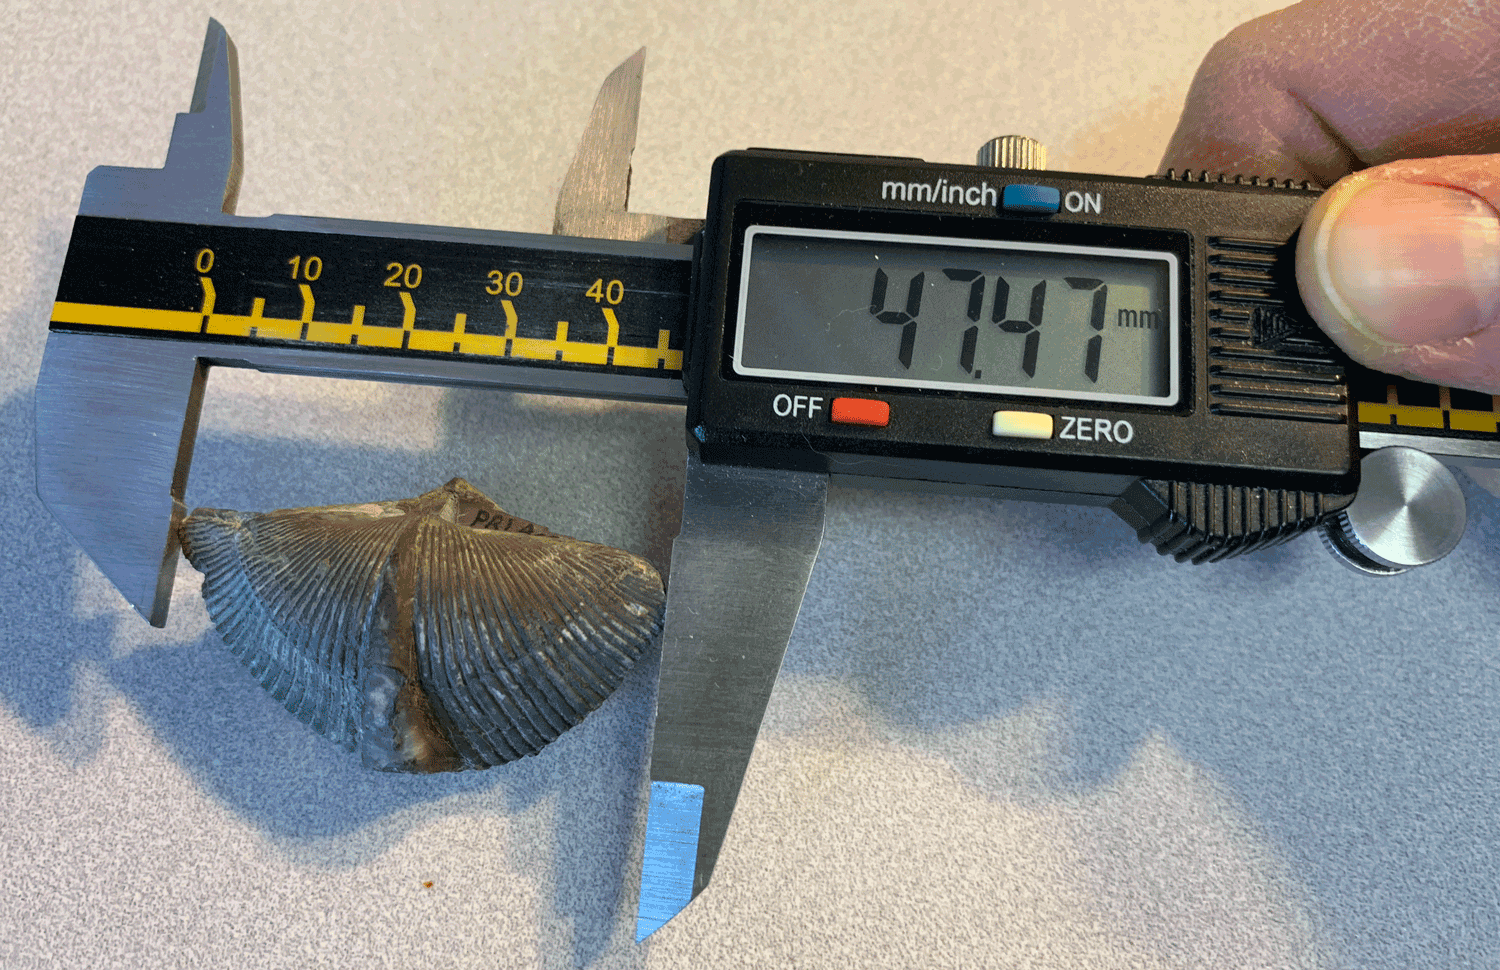 Example of a measurement being collected from a specimen of the brachiopod Mediospirifer audaculus using a digital calipers. Specimen is from the Middle Devonian Moscow Formation of Livingston County, New York (PRI 76830).